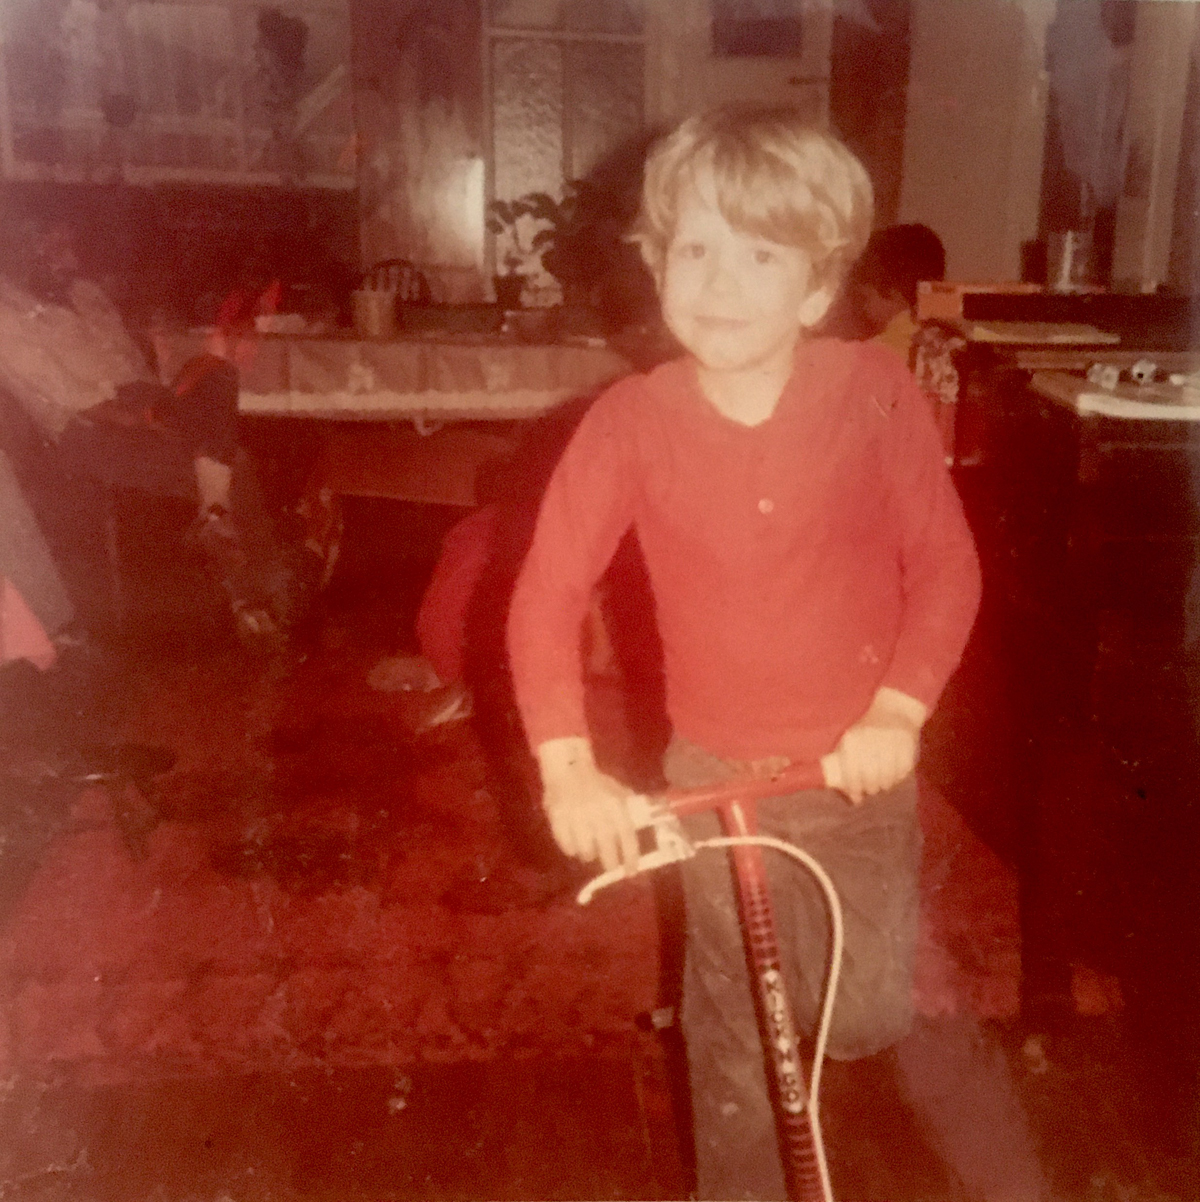 I do not wish to name names without permission but this is the brother of a famous actress at my birthday party at 16 Greene, 1978.